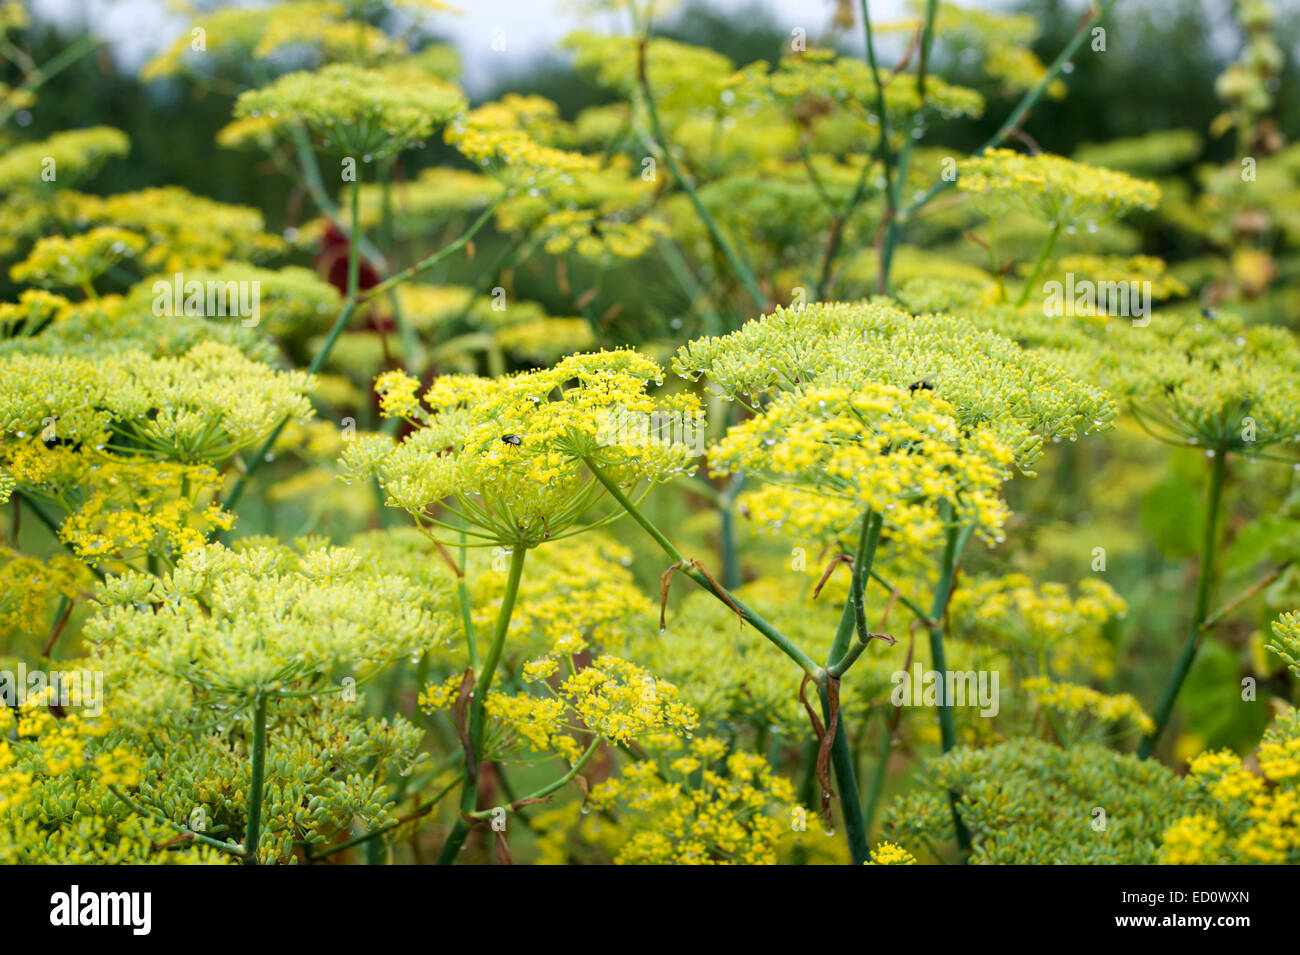 Massed Fennel flowers present a striking image throughout this large herb garden Stock Photo